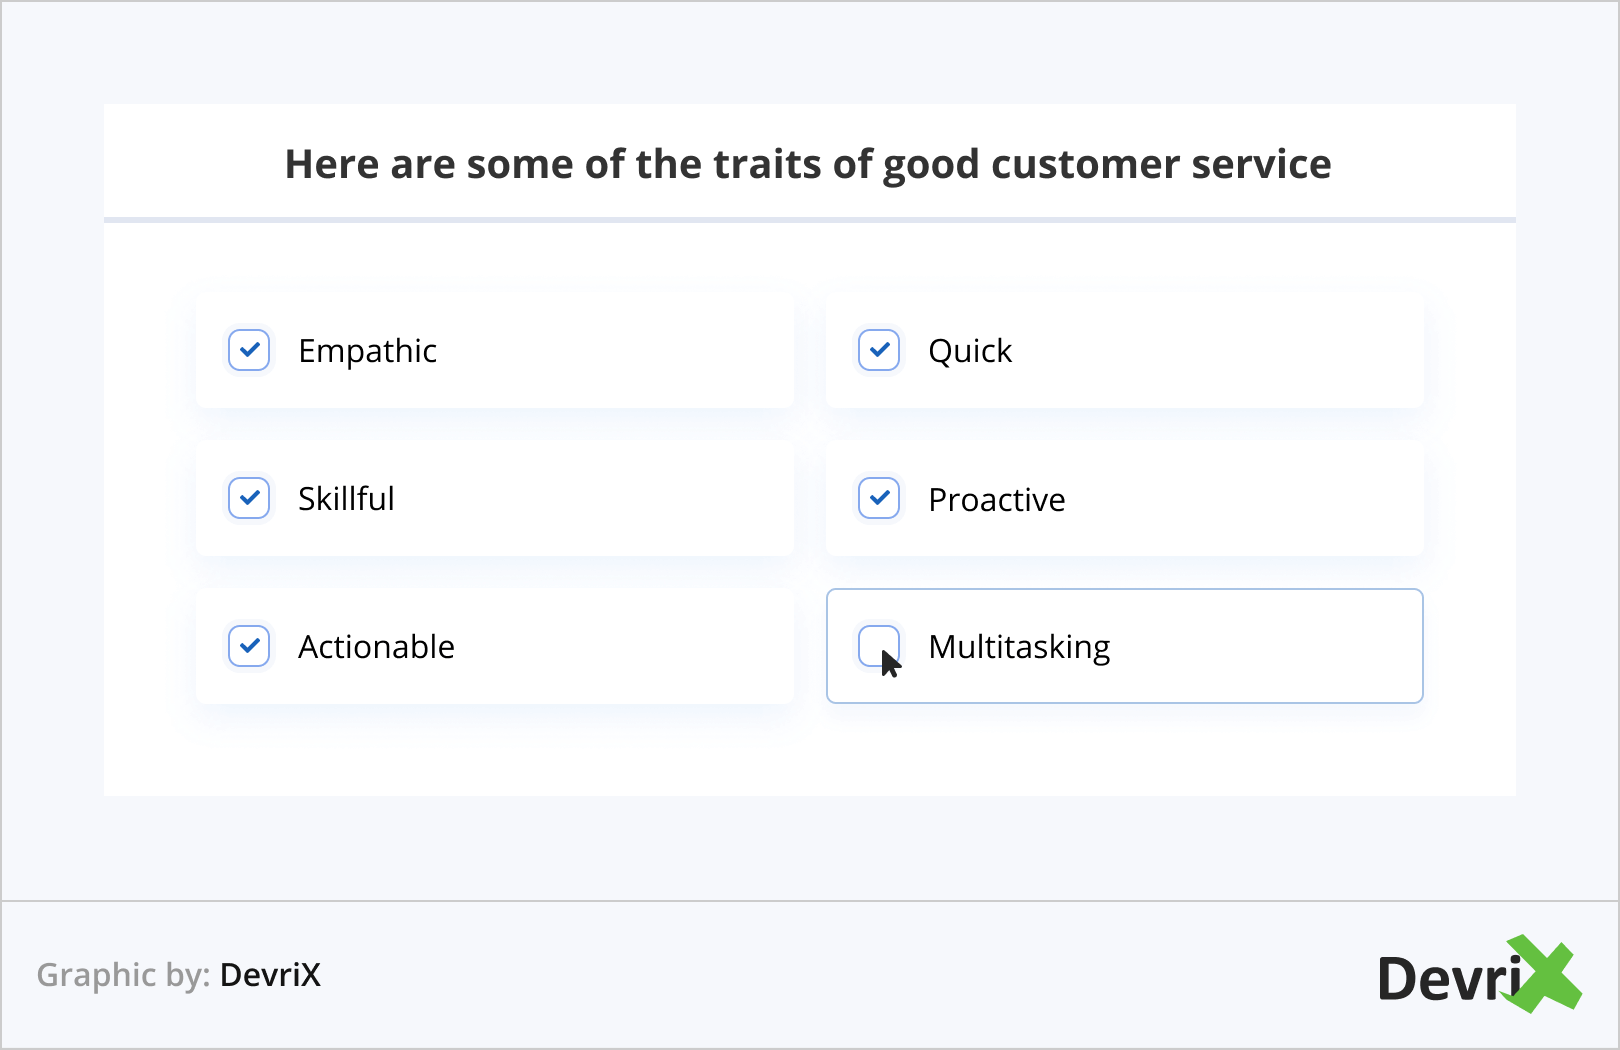 Here are some of the traits of good customer service